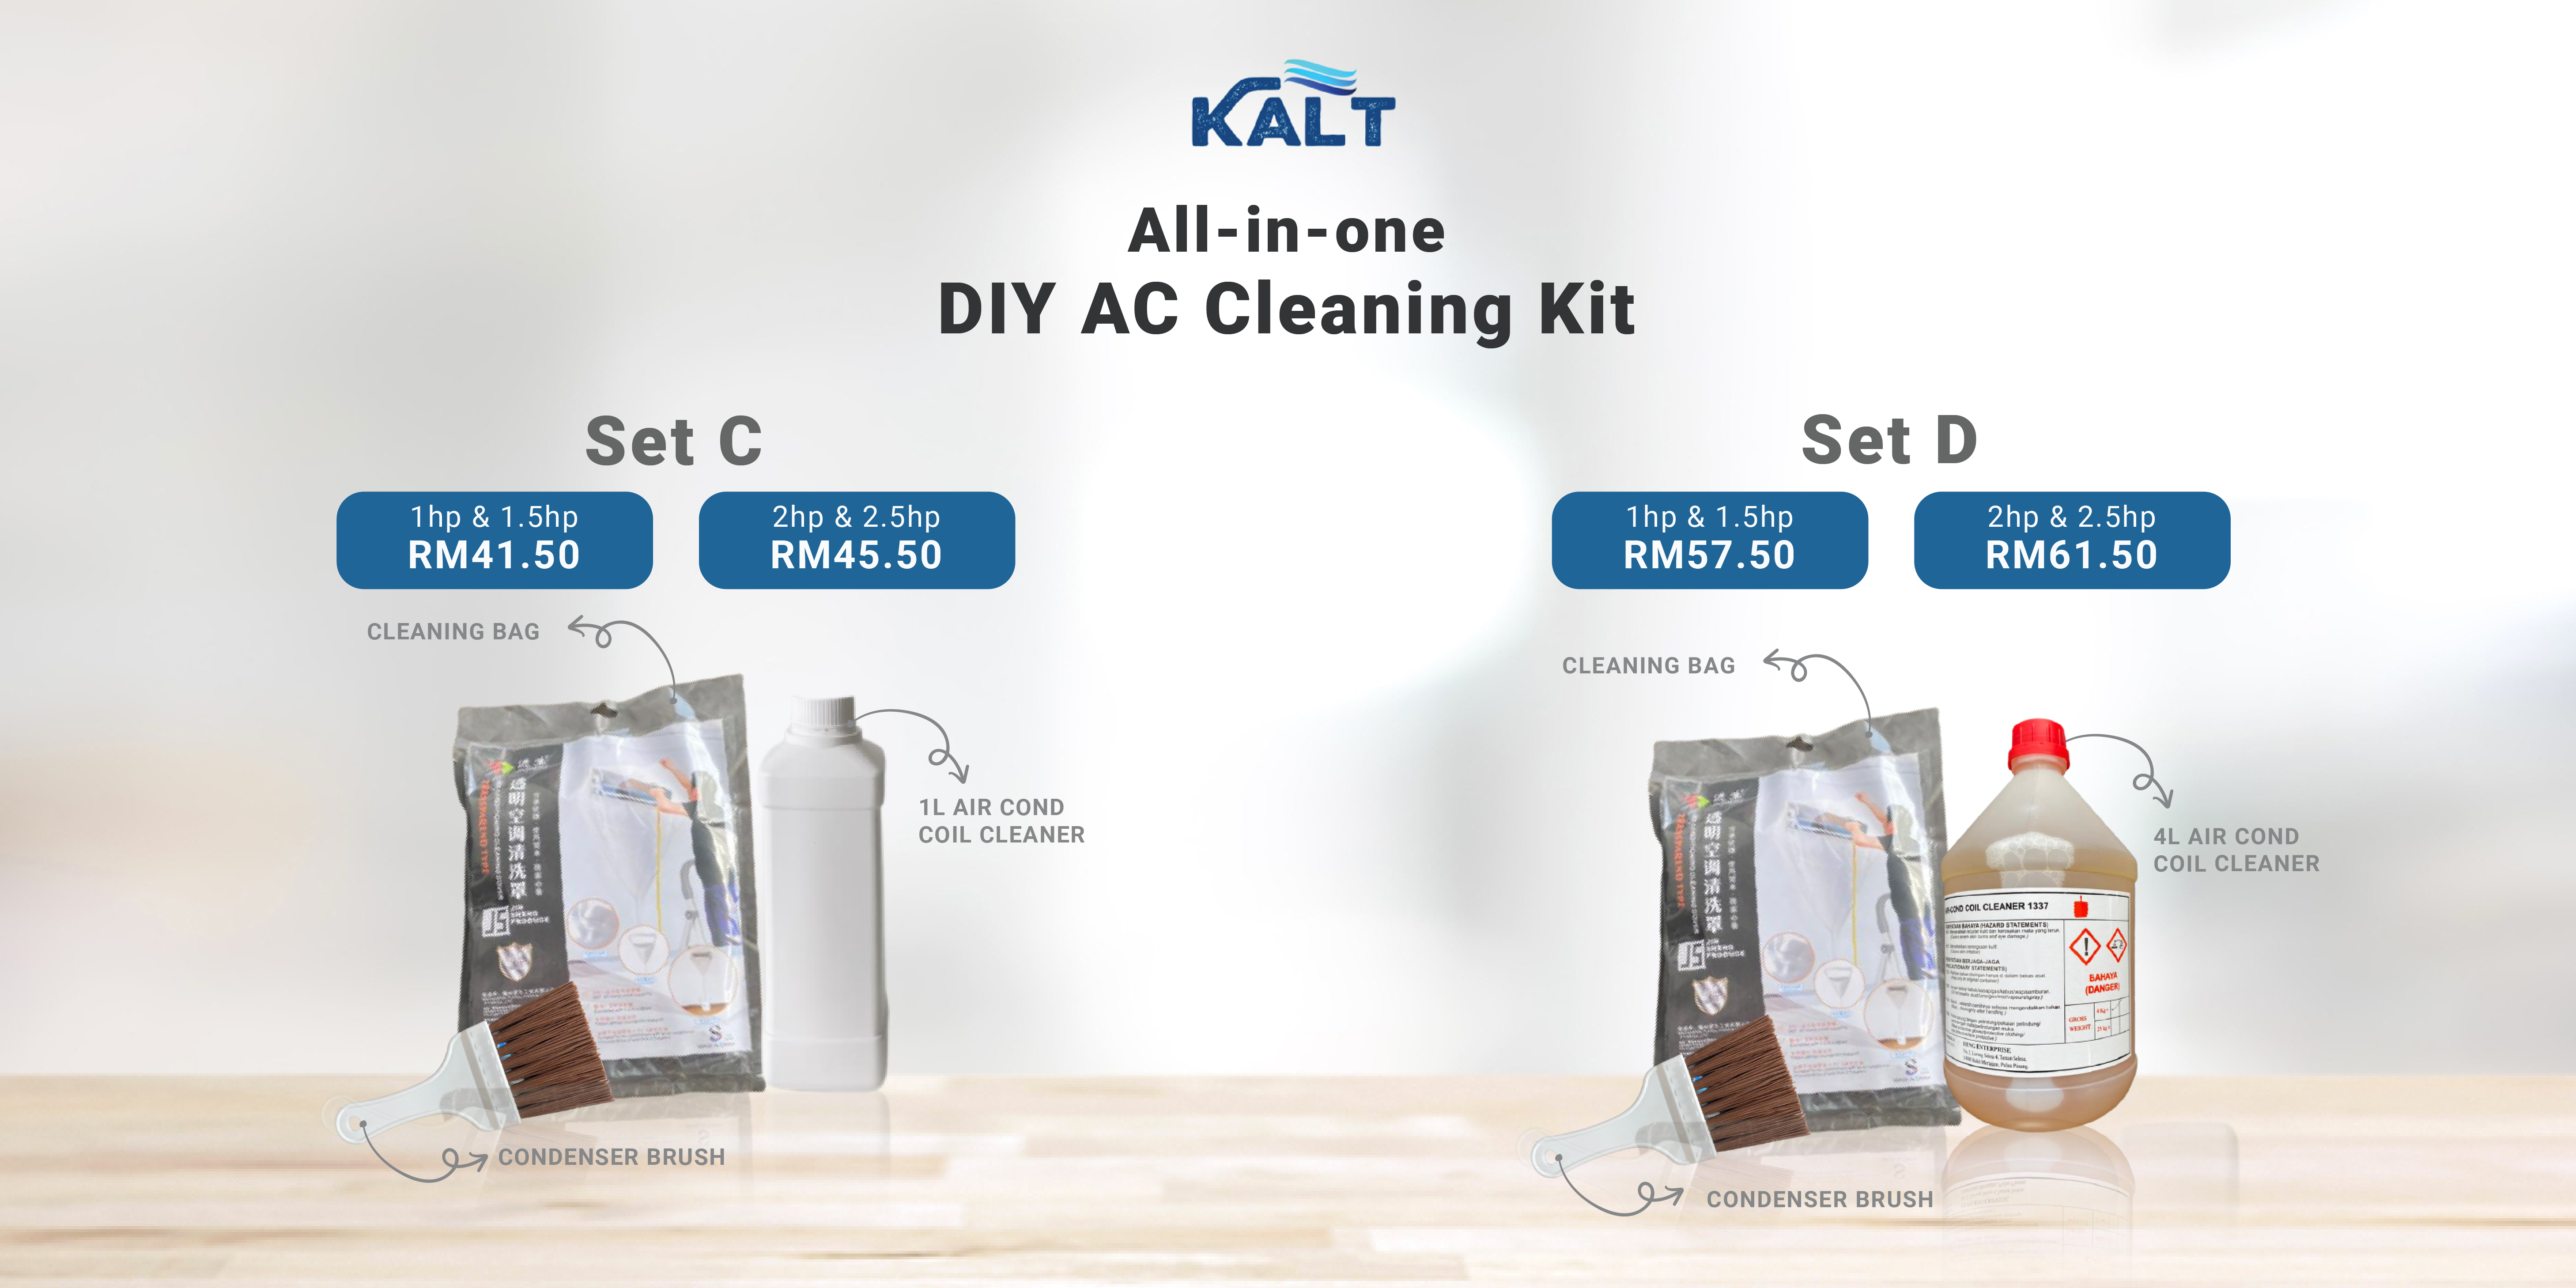 Air Cond Cleaning Kit